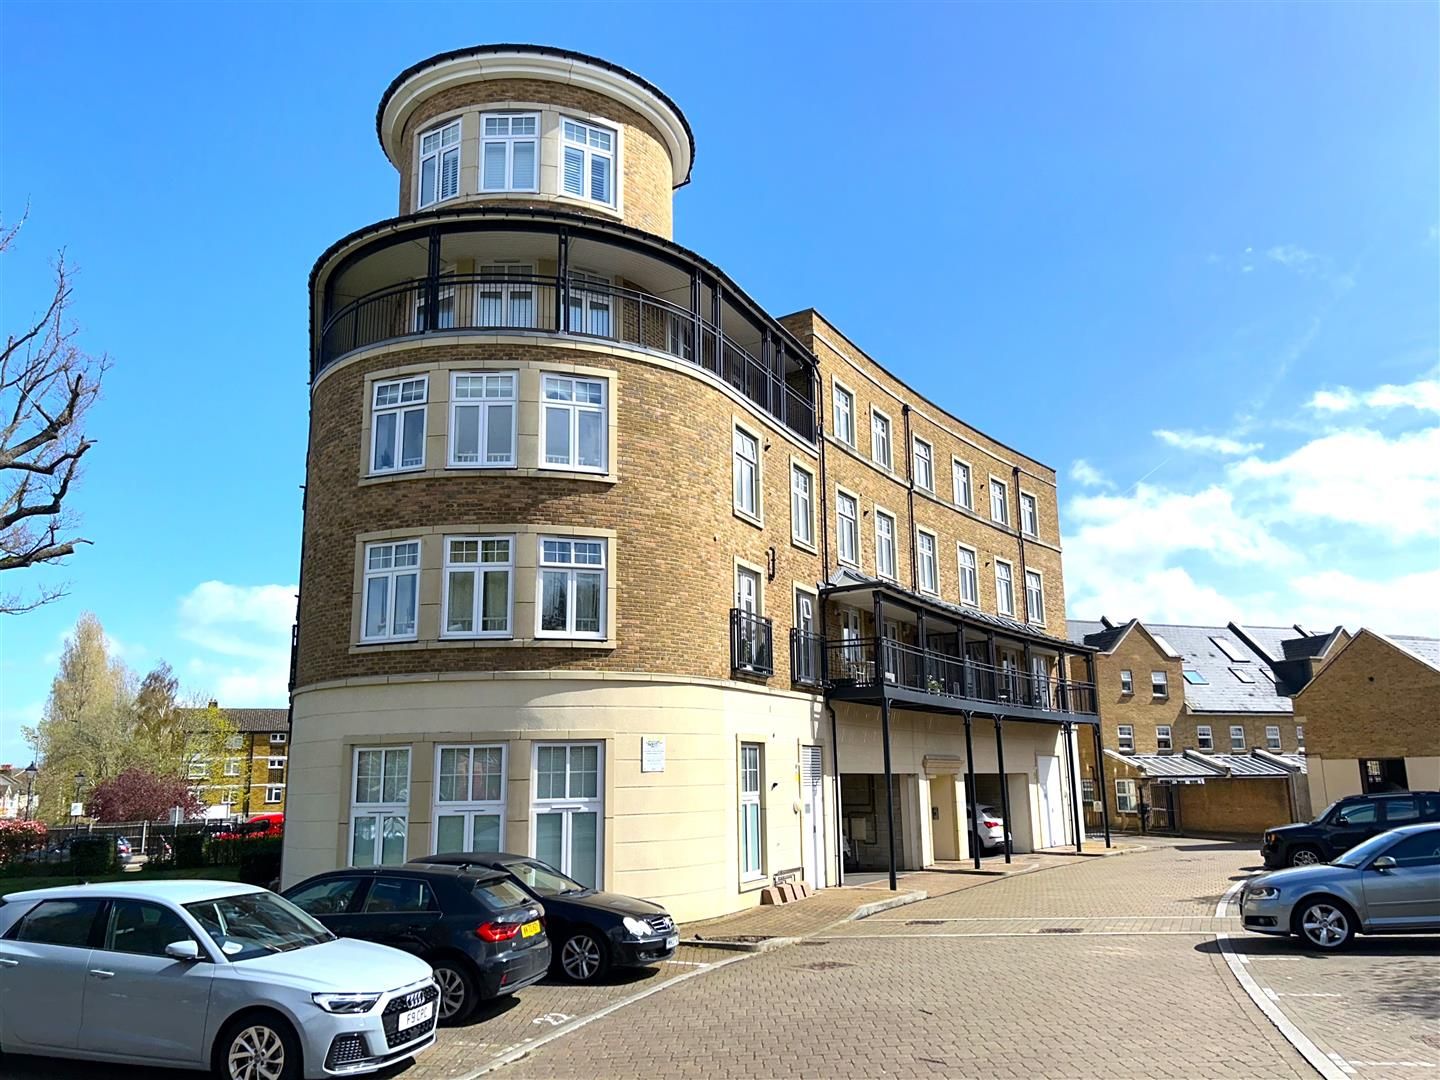 Wrights Court, 6 Jefferson Place, Bromley, Kent, BR2 9FX